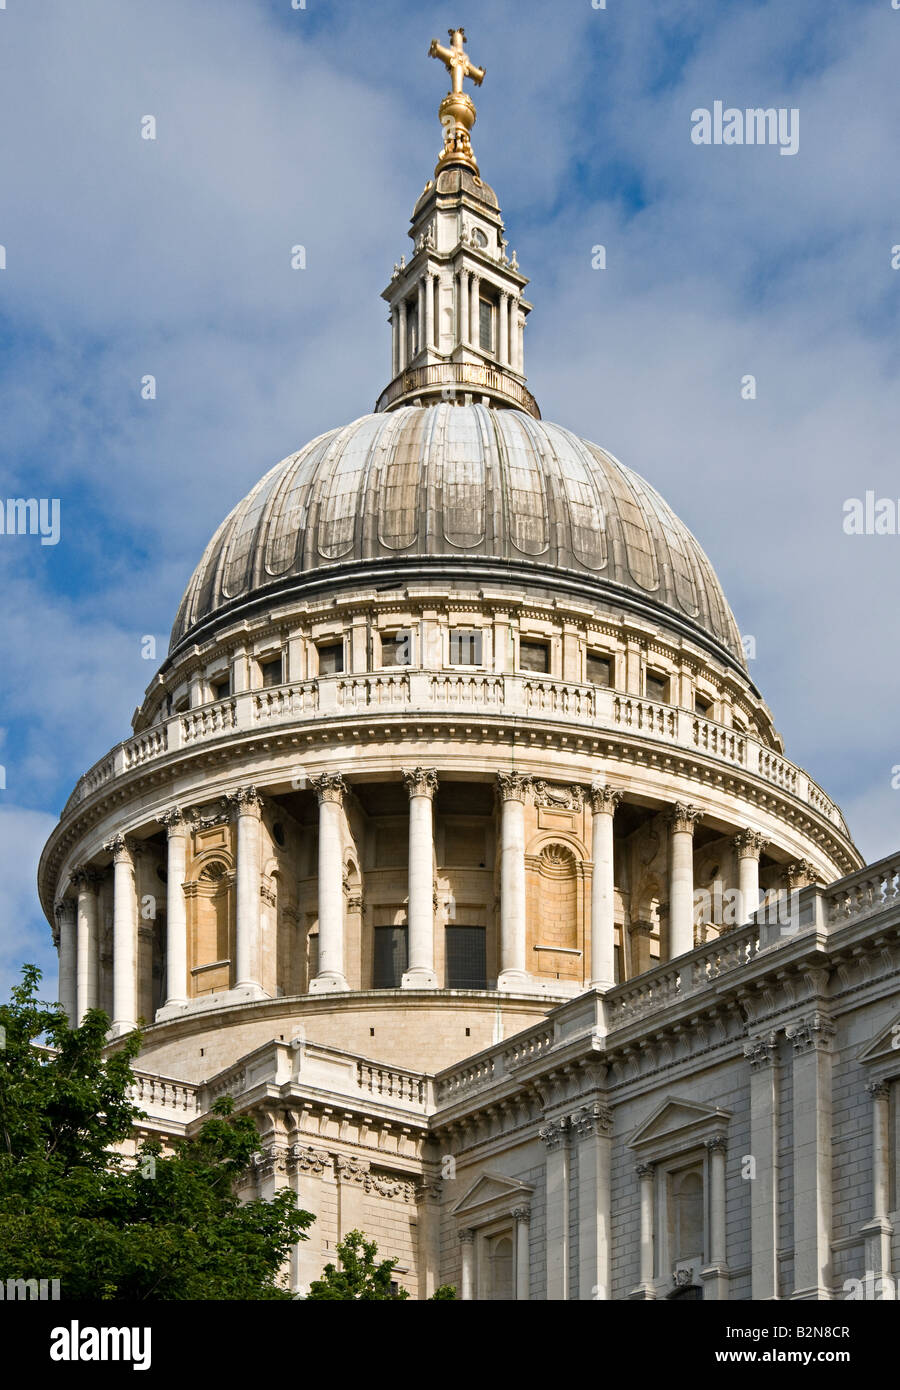 Dome of St Pauls cathedral London United Kingdom Stock Photo